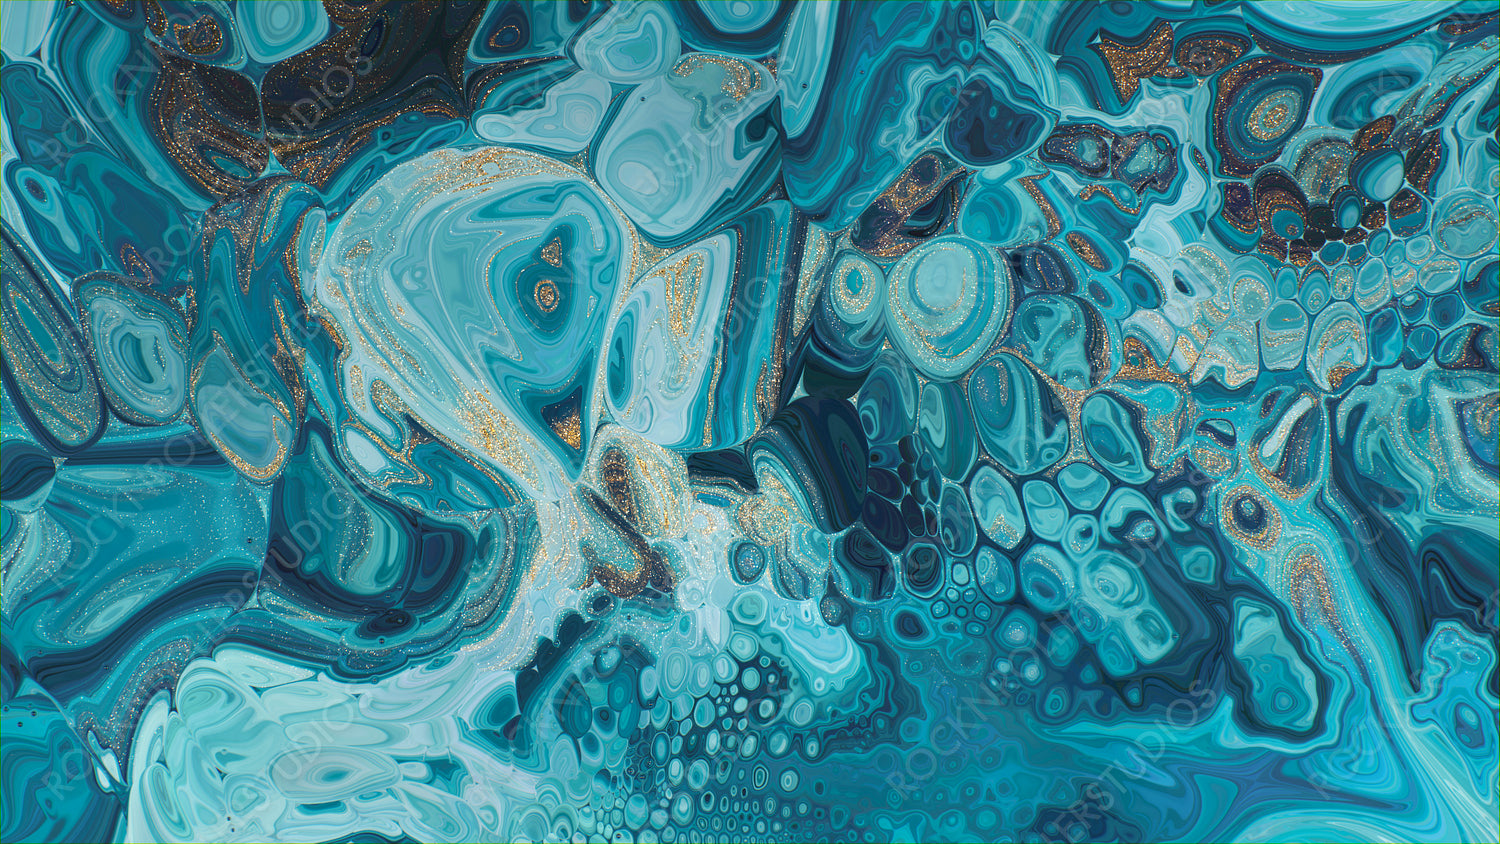 Paint Swirls in Beautiful Teal and Blue colors, with Gold Powder. Contemporary Acrylic Pour Background.